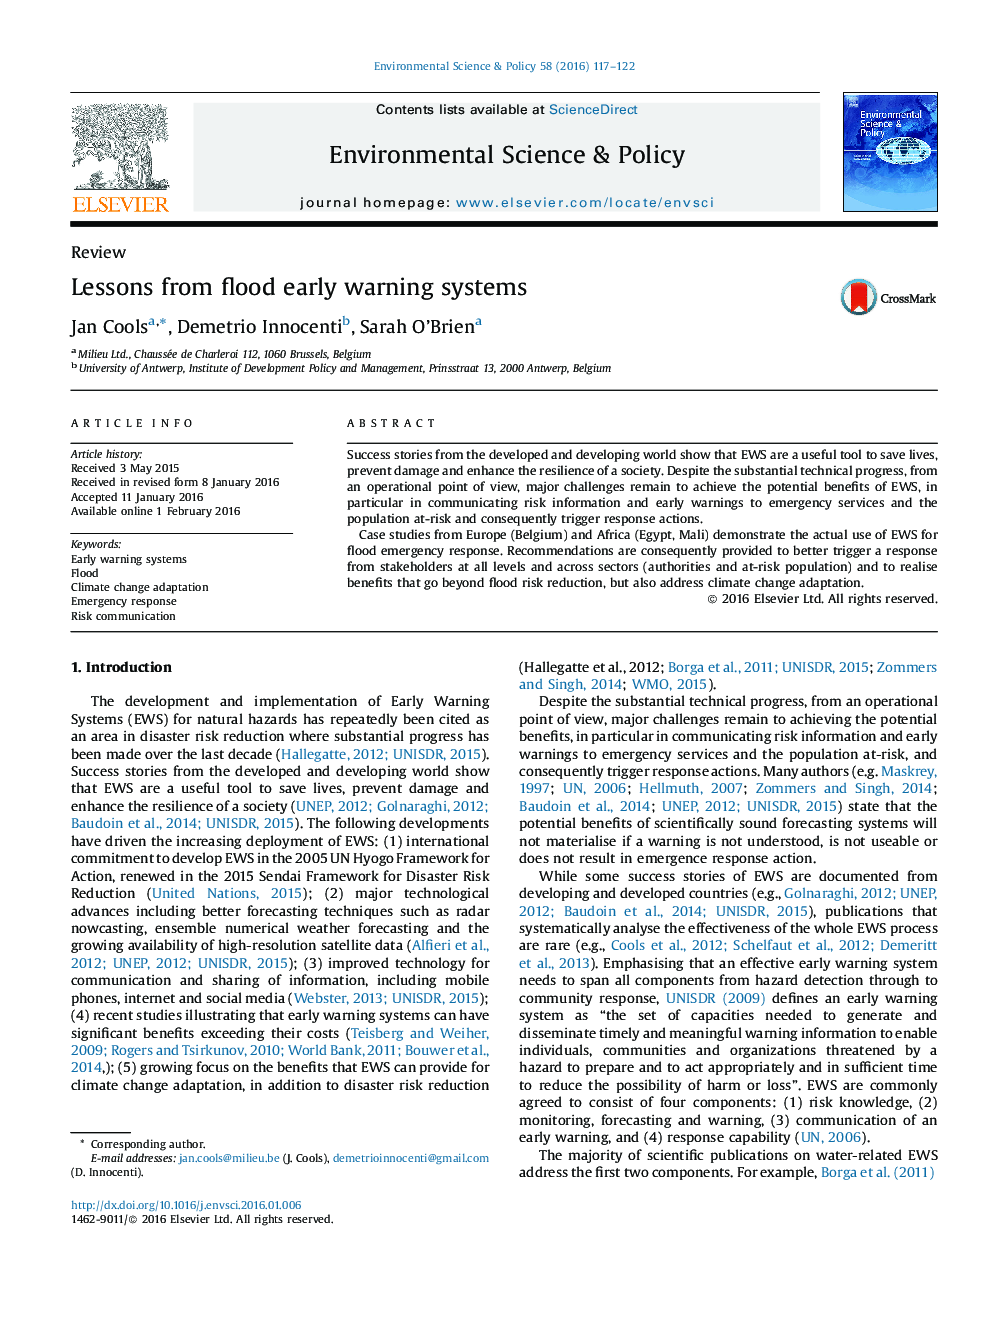 Lessons from flood early warning systems